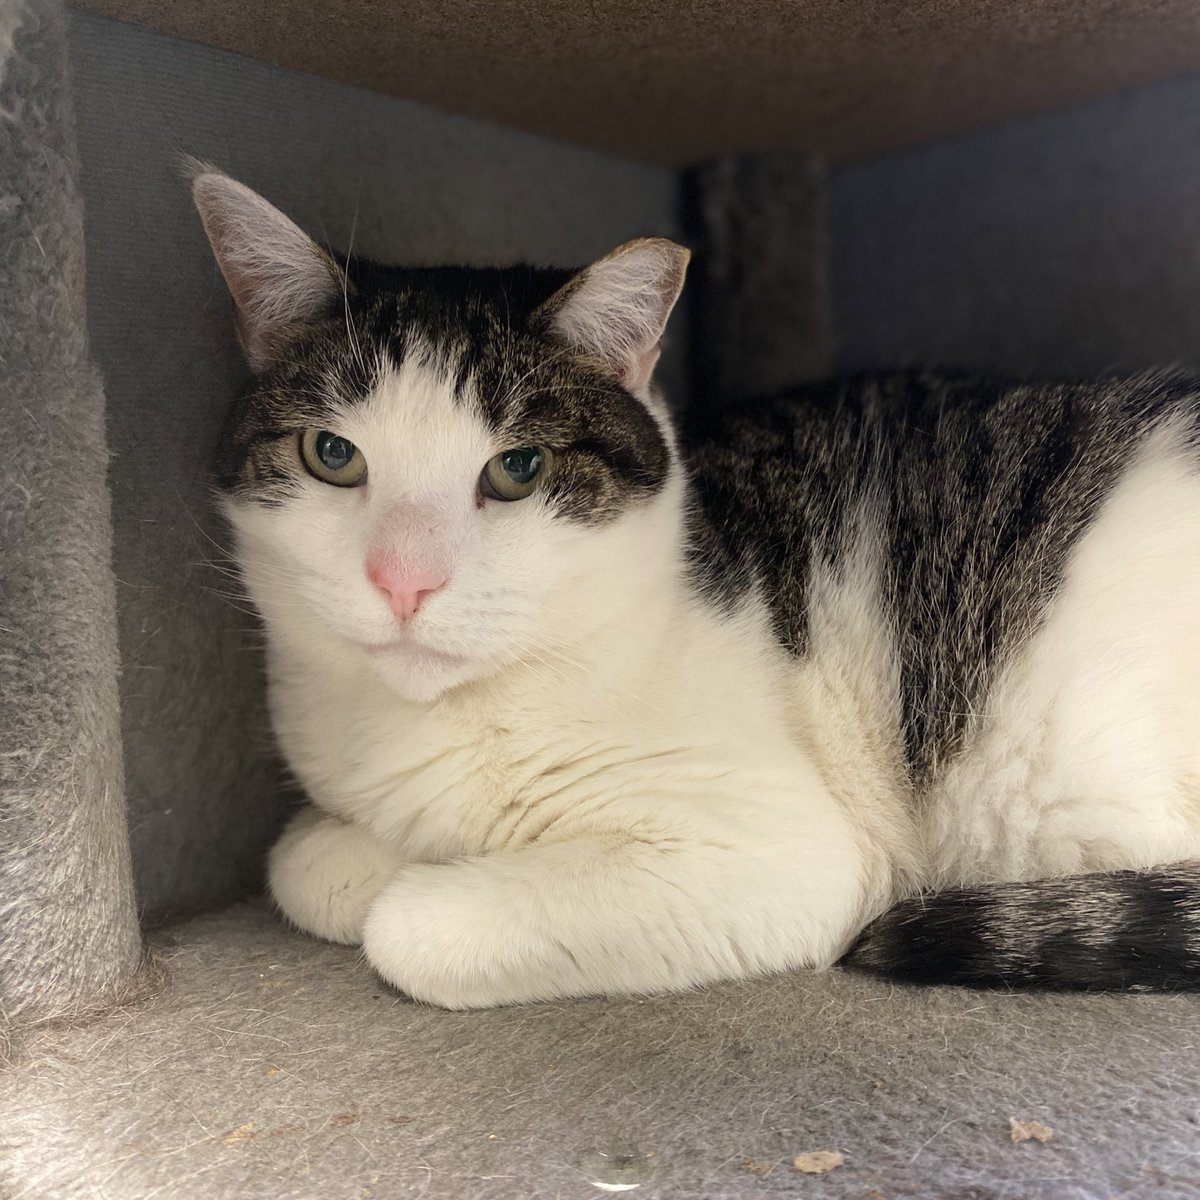 Handsome Bert is about seven years old and looking for a new home. He’s a quiet guy who is easygoing and laidback. Bert is currently in our community room with several other cats. He keeps to himself and would like a low-traffic home. 

📍 Blackwood, NJ

#sheltercat #adopt #cat